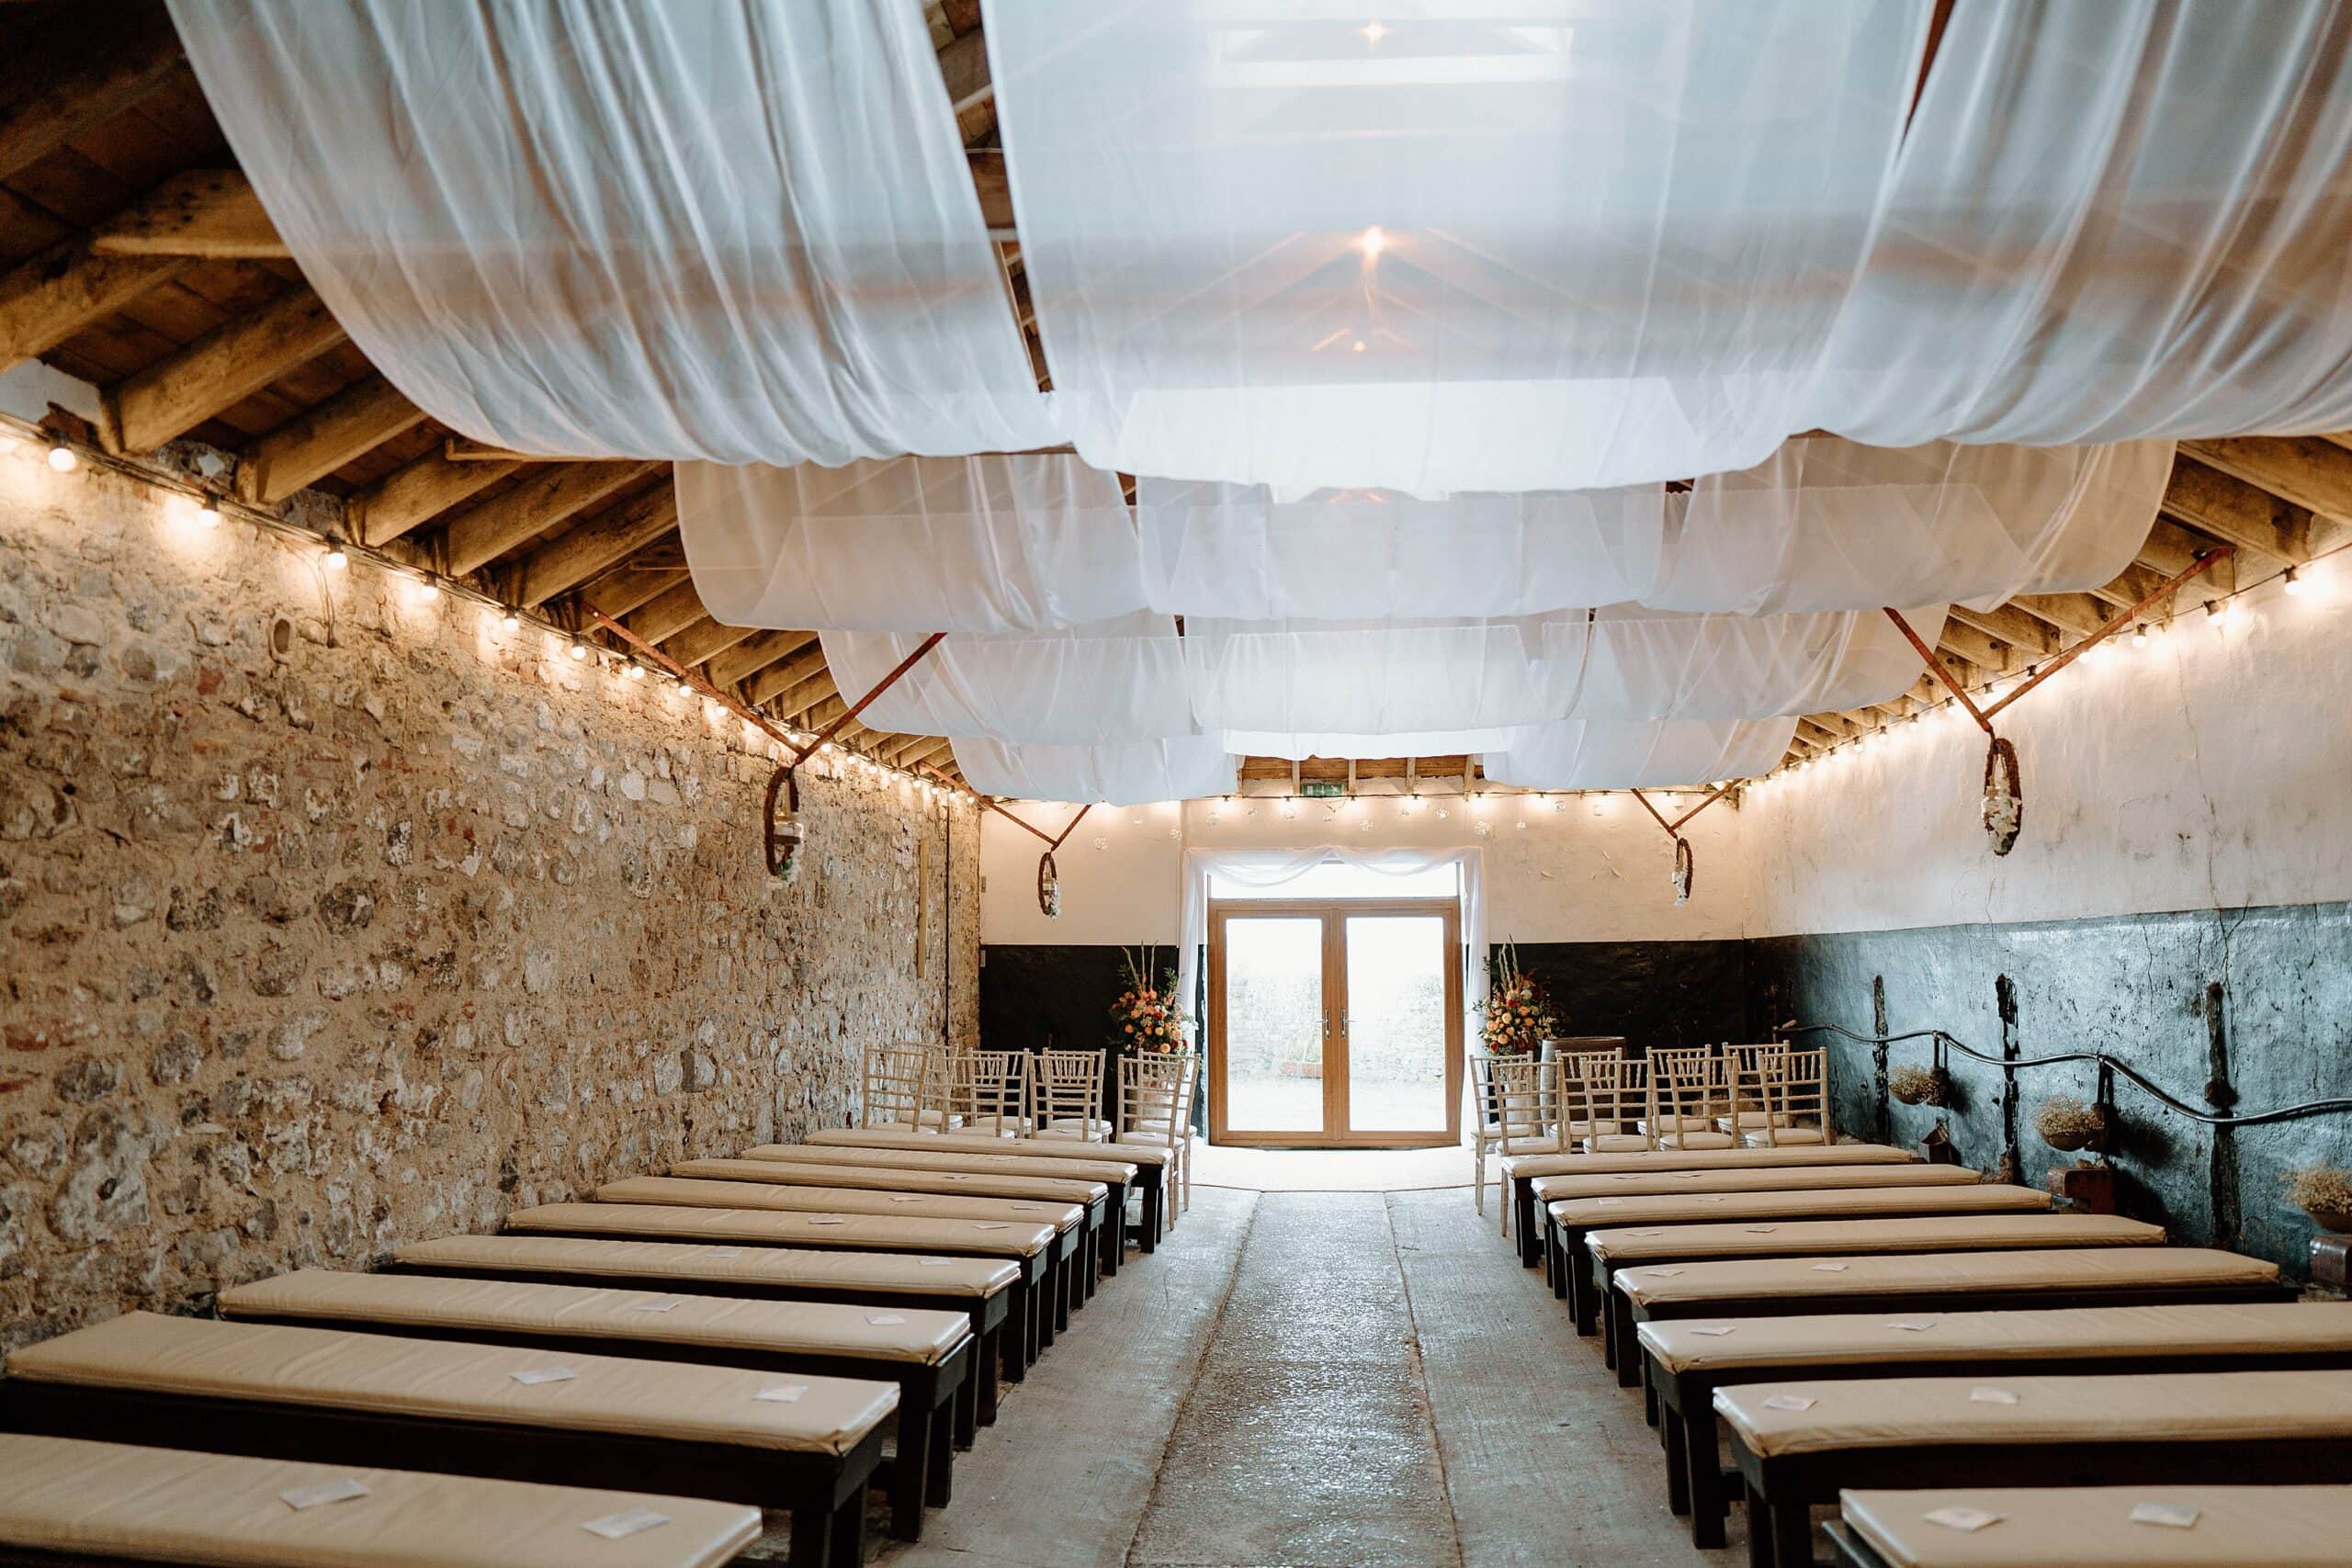 the wedding byre at harelaw farm wedding barn venue fenwick scotland set up for ceremony with seating and white drapes hanging from the ceiling